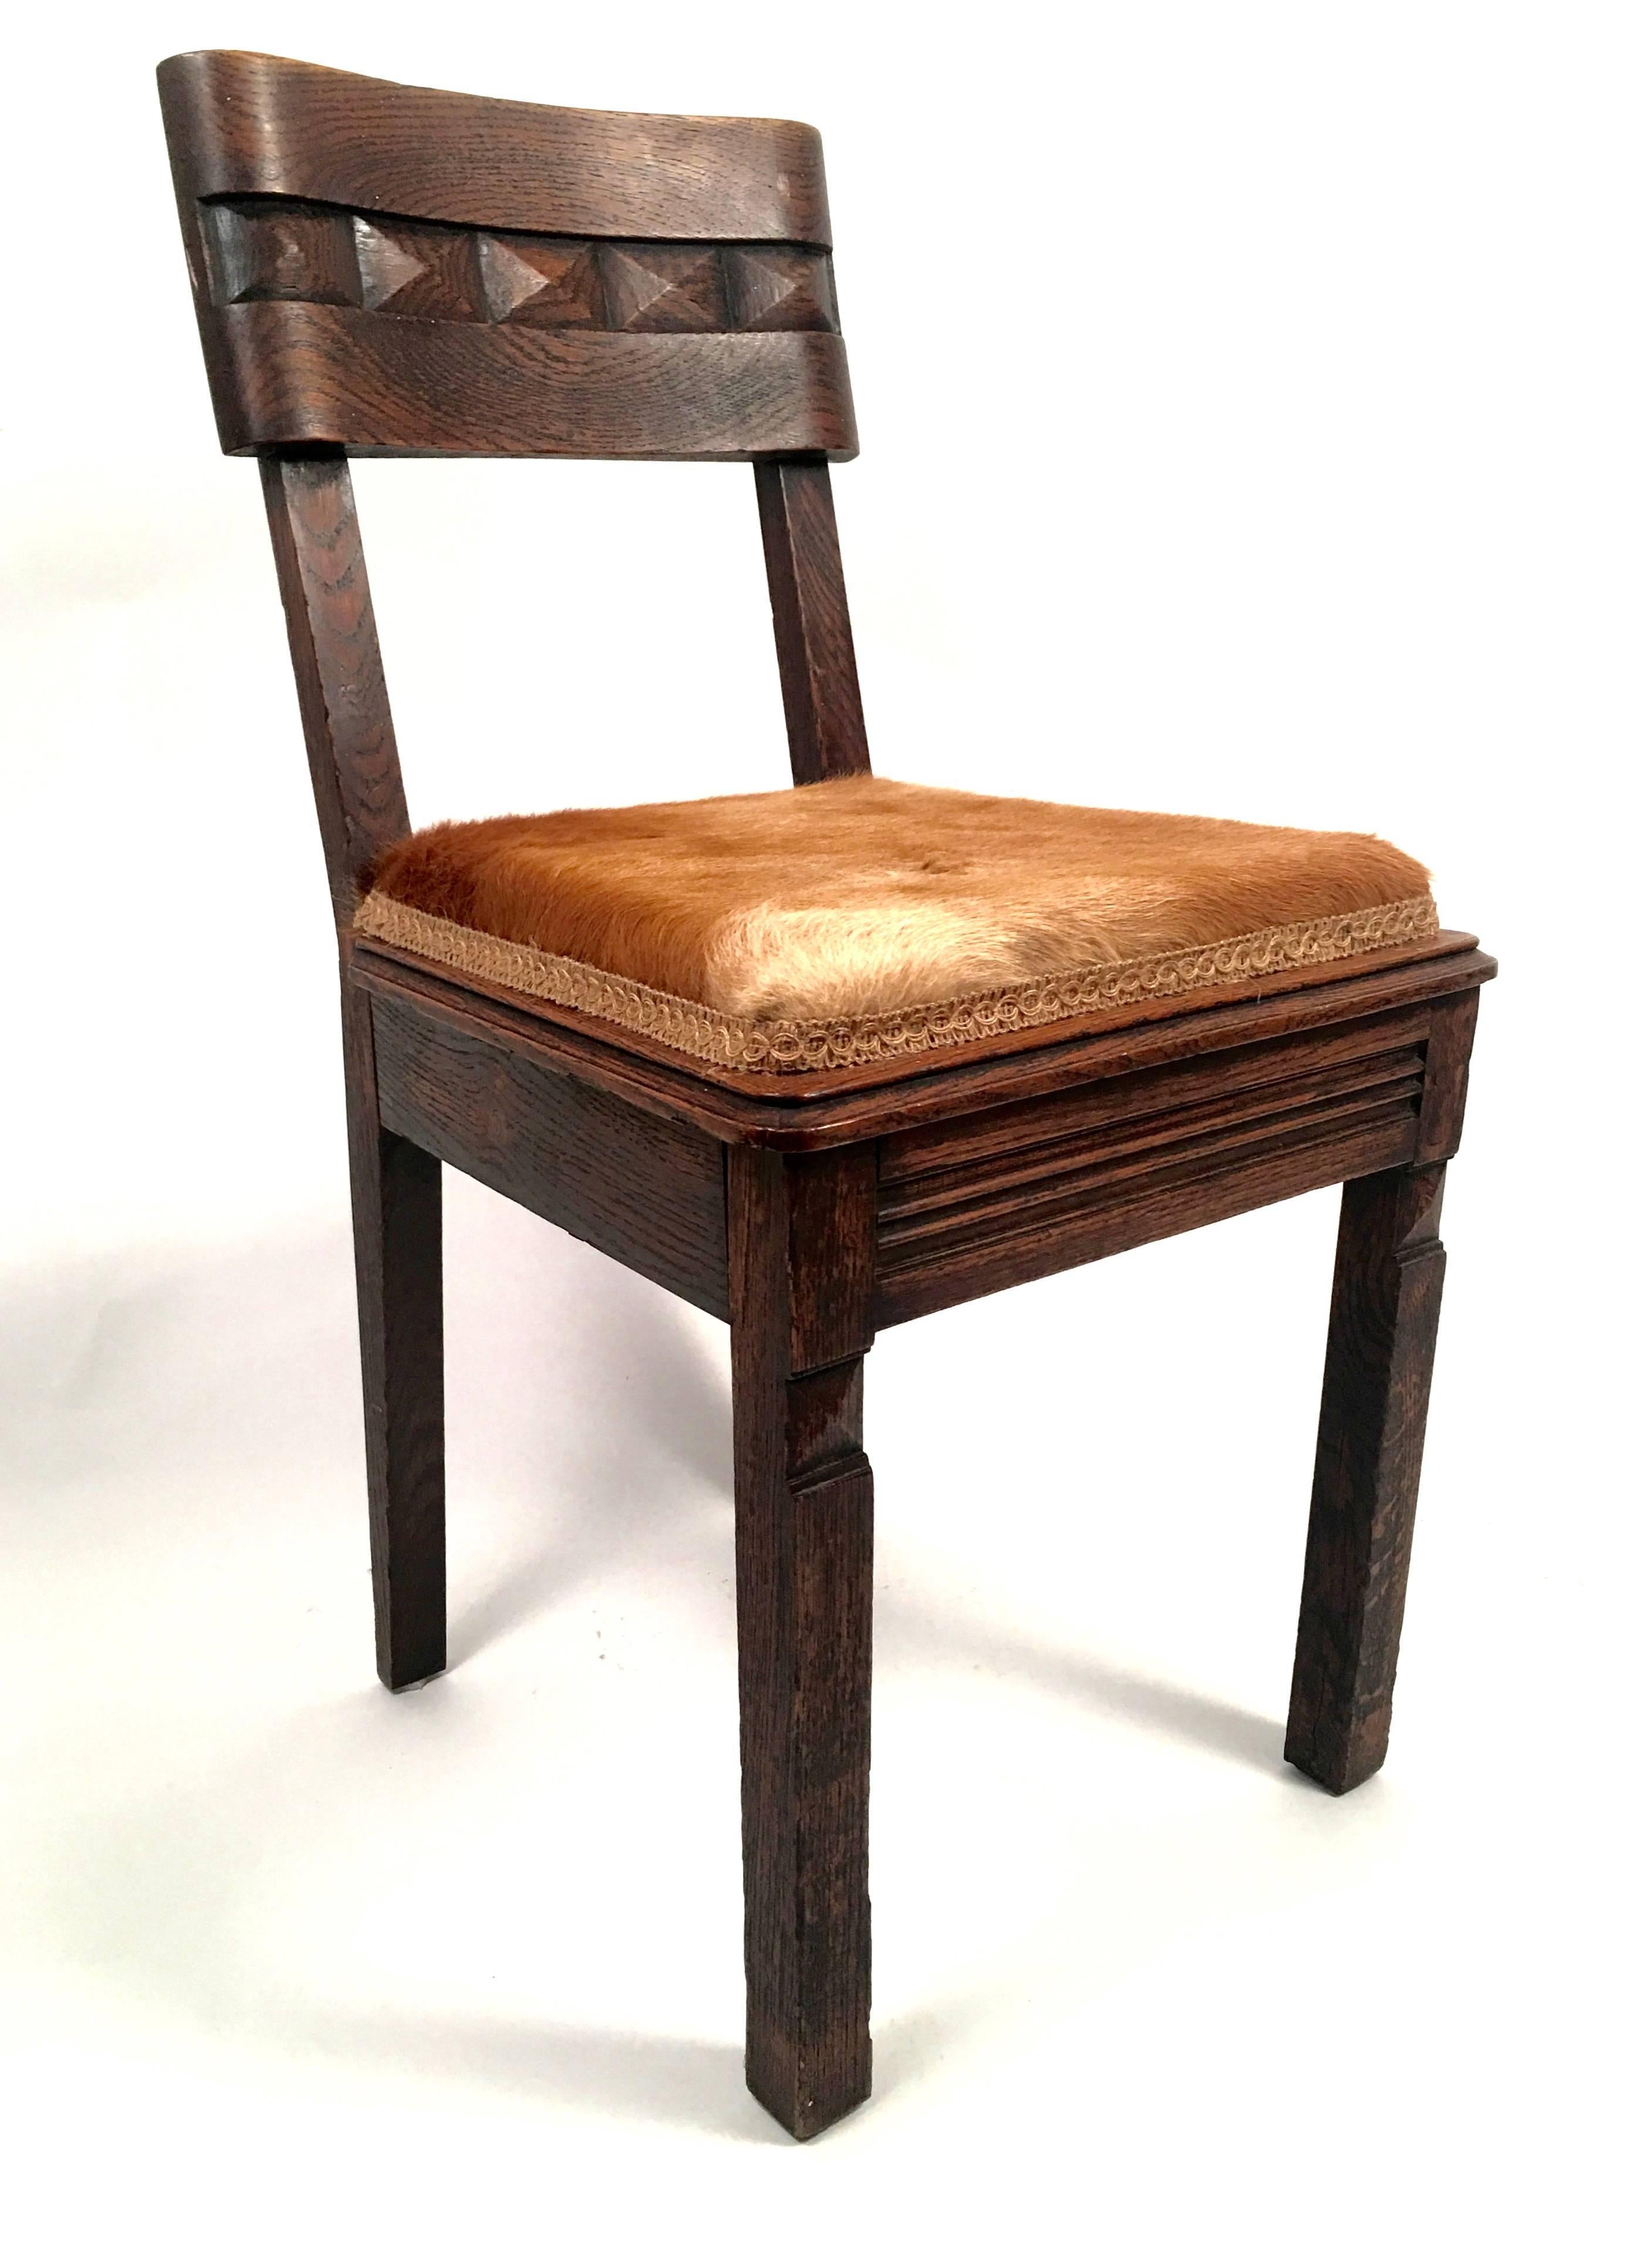 A stylish and well made pair of Art Deco chairs in carved oak, the curved rectangular backs with a band of carved gemstone decoration in the middle of each, the seats upholstered in luxurious deer fur with hemp gimp trim, the seat rail and square